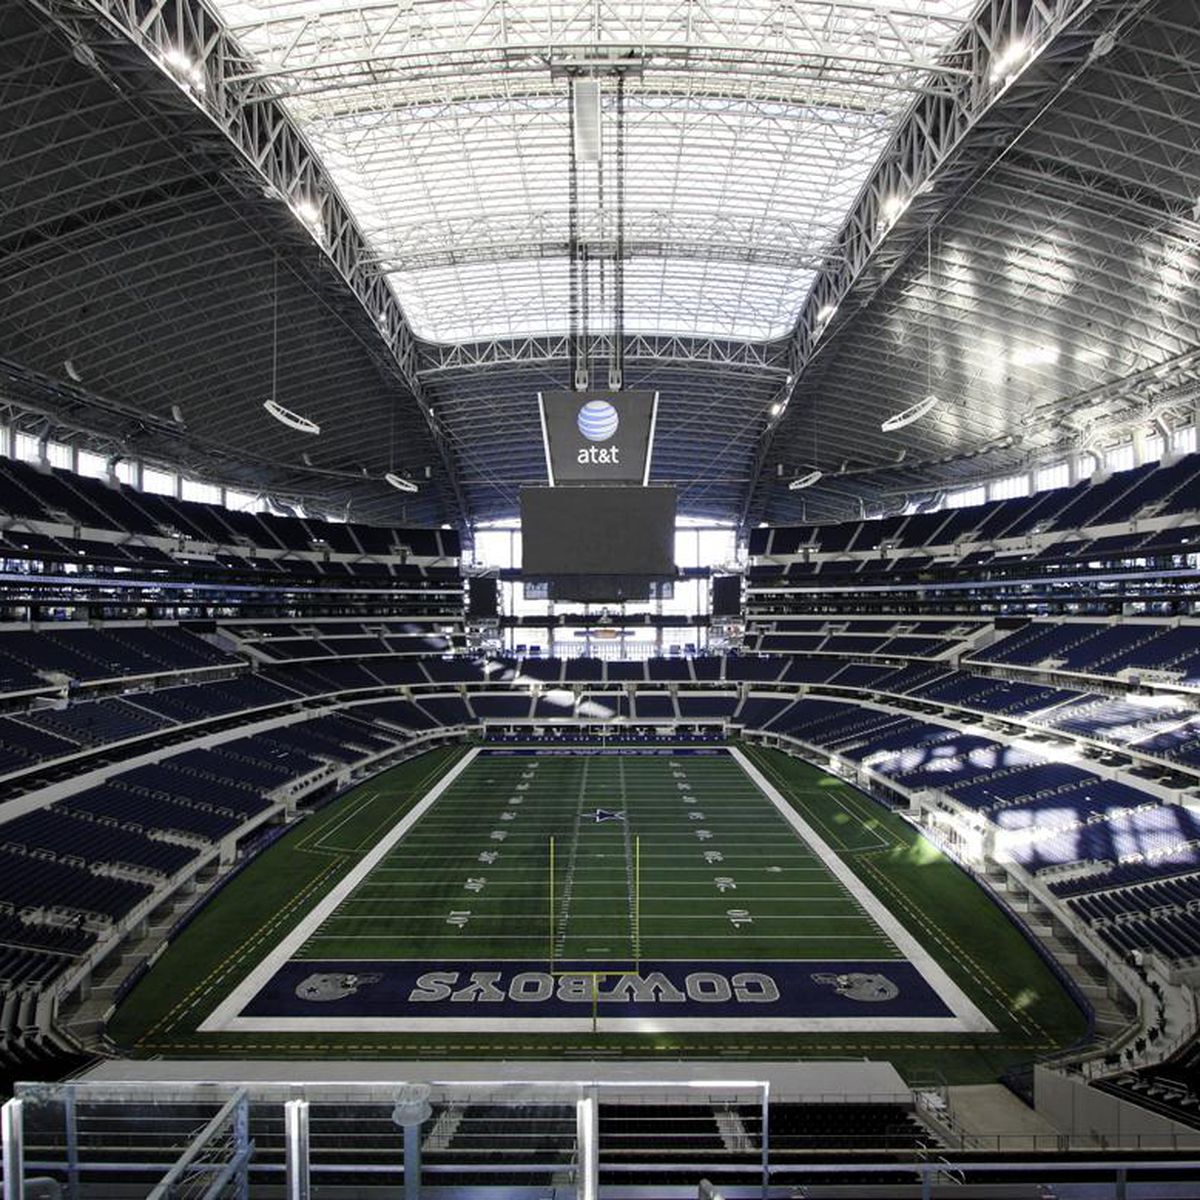 AT&T Stadium plans $295 million upgrade ahead of the 2026 FIFA World Cup -  FTWtoday